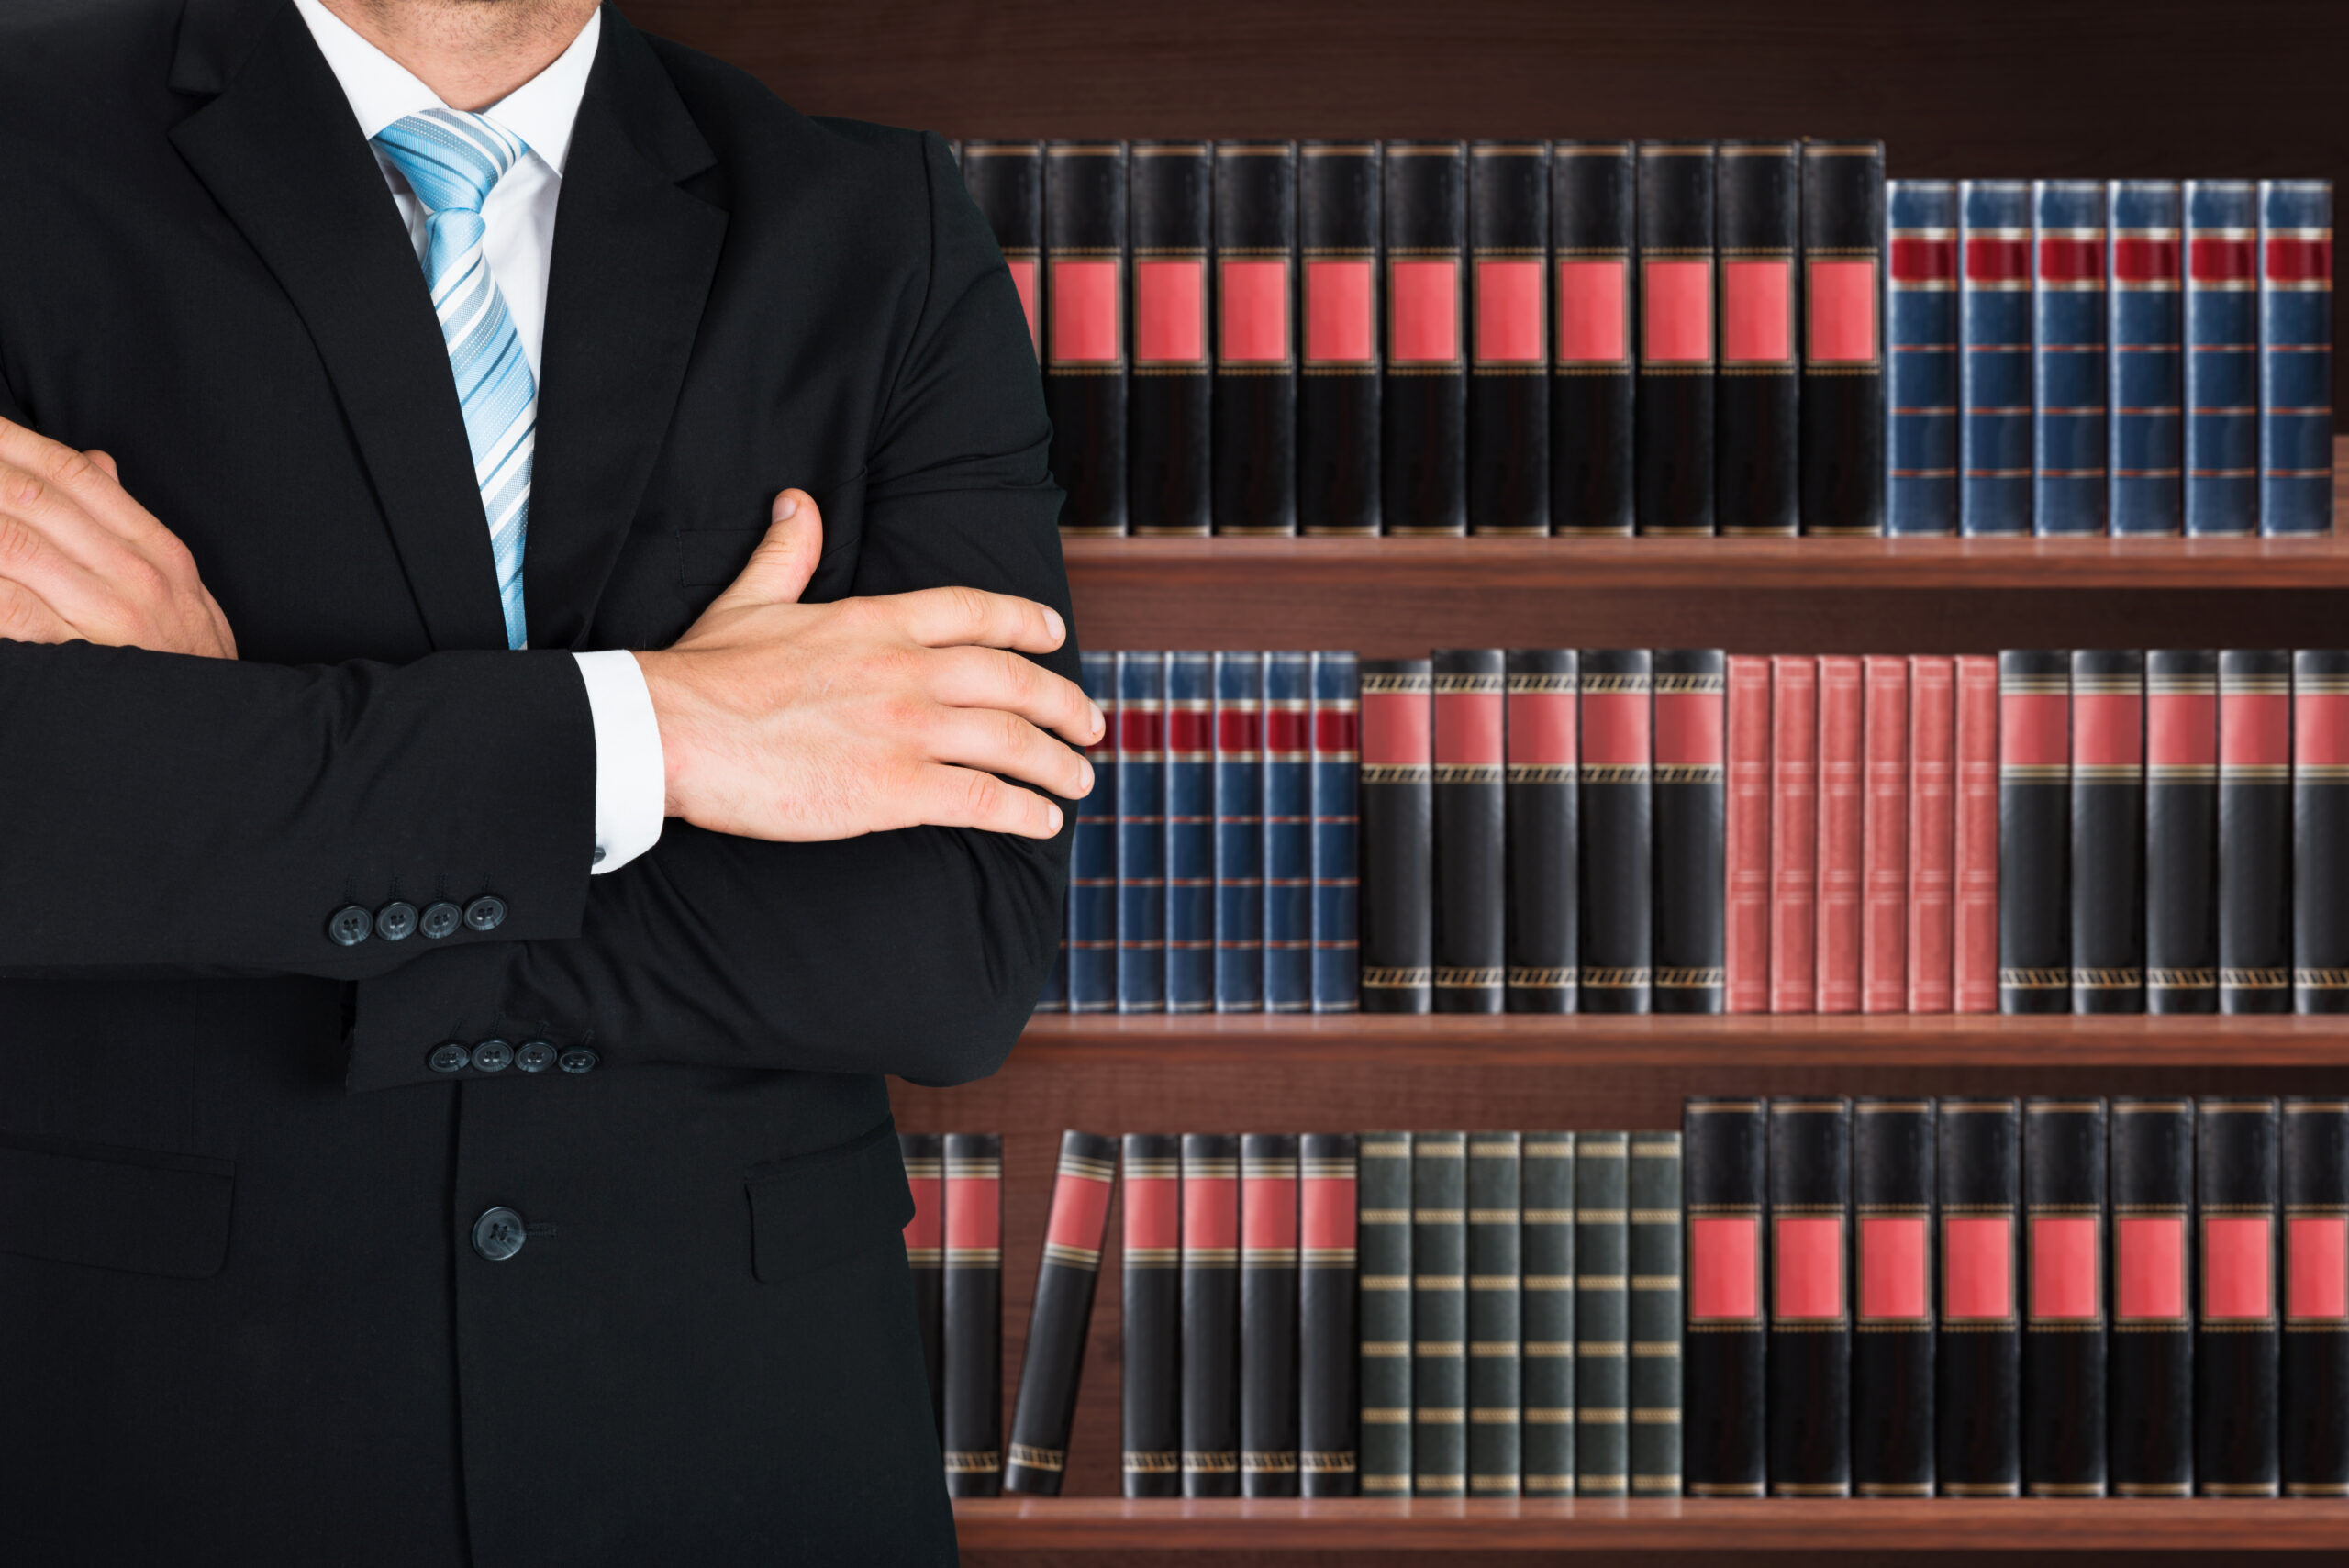 a lawyer standing in front of a bookcase filled with legal books